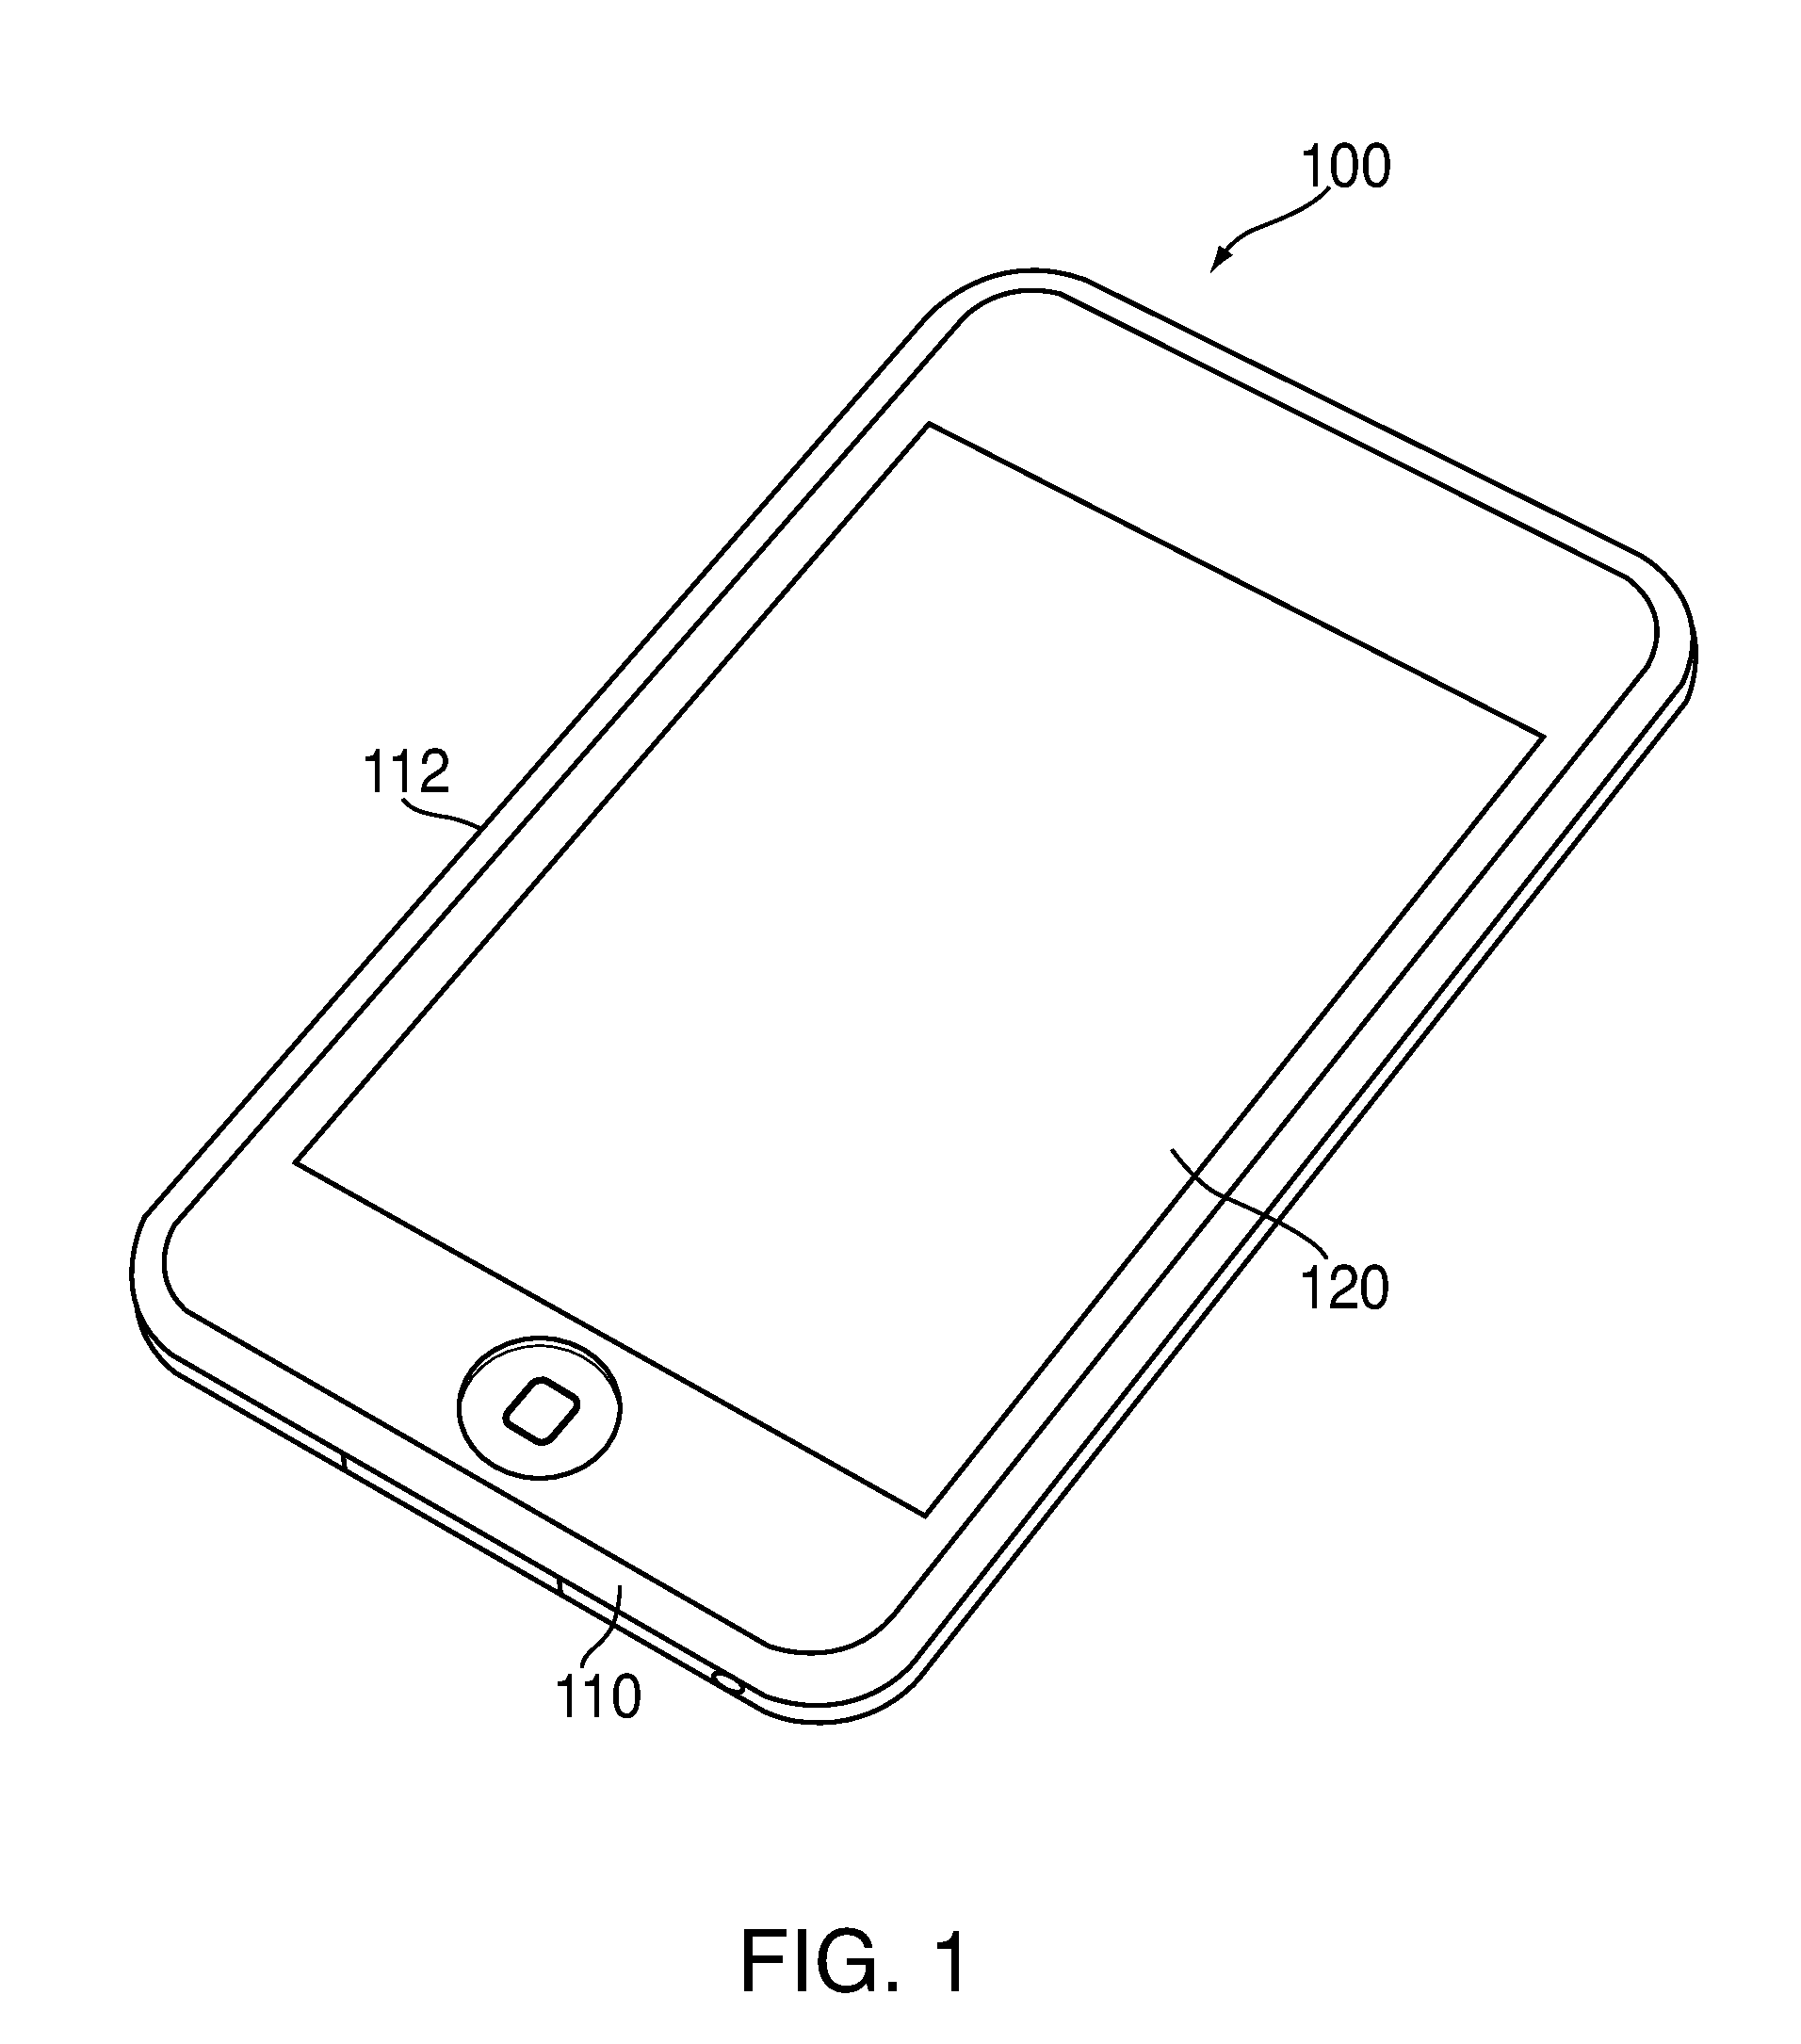 Foldable case for use with an electronic device